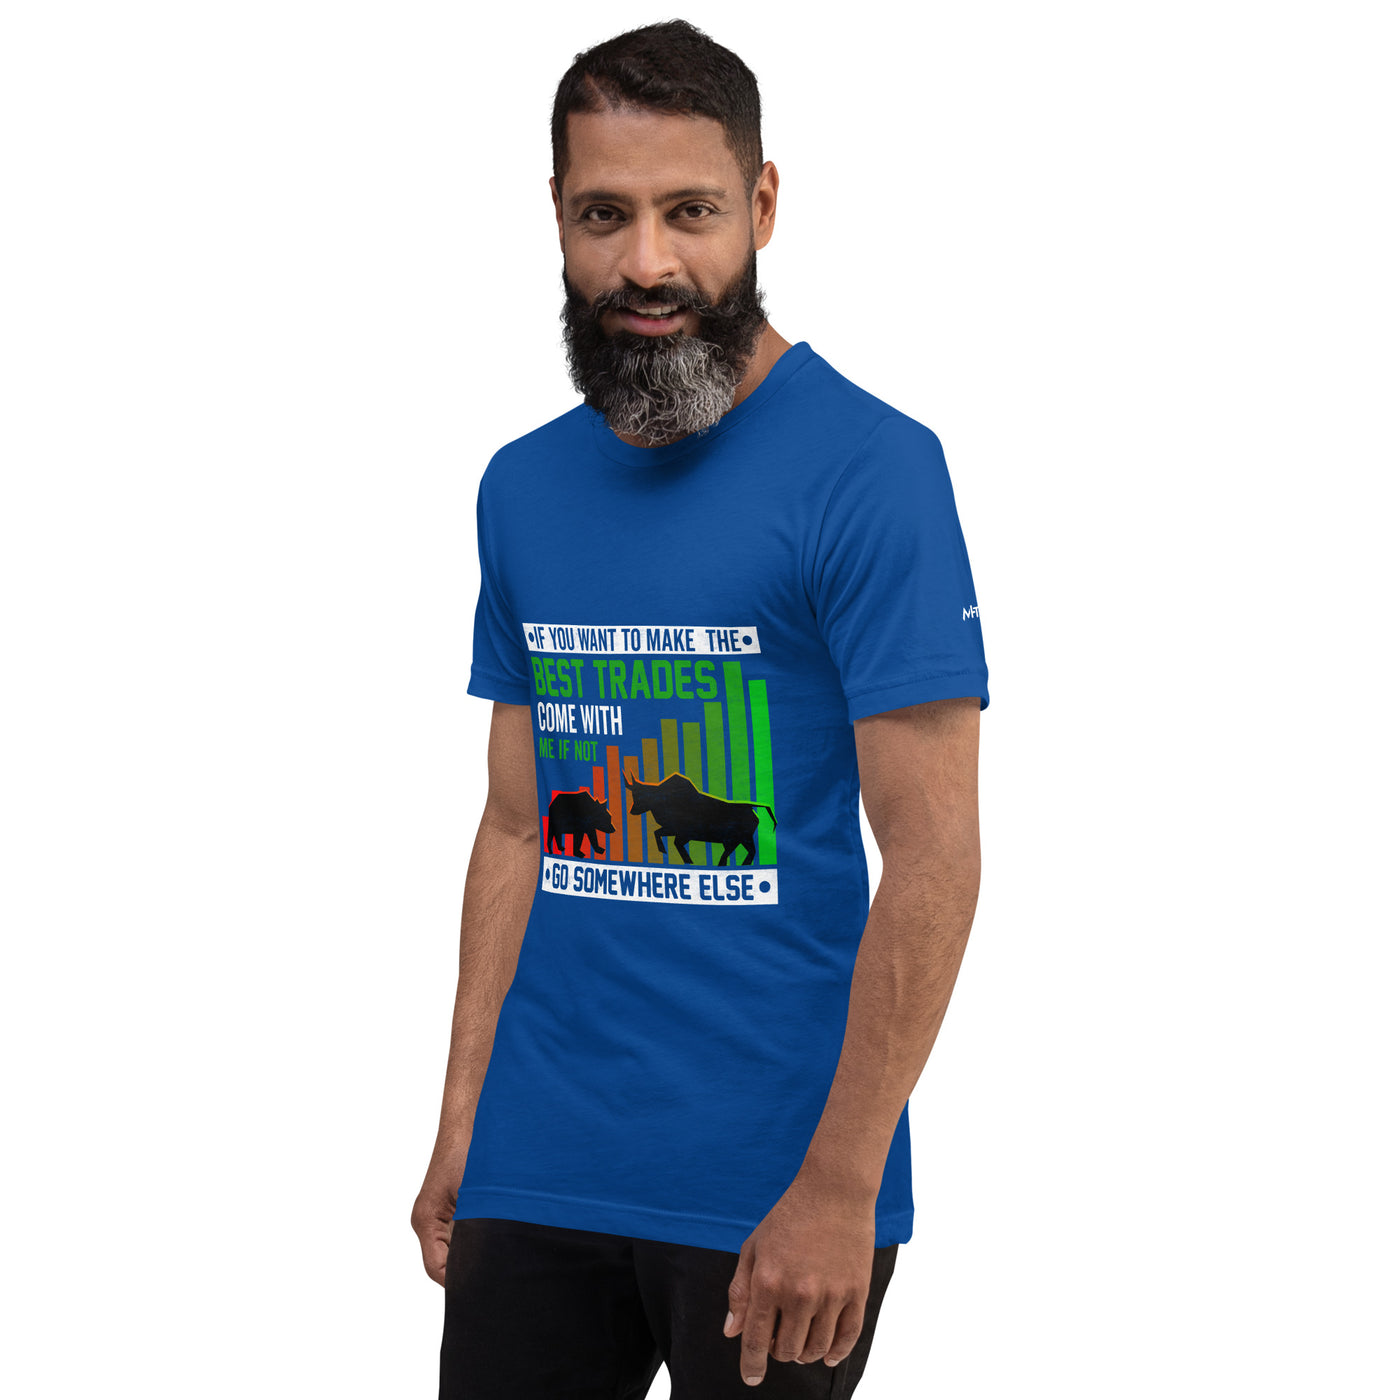 If you Want to Make the best trades, Come with me if not, go somewhere else Eyasir - Unisex t-shirt